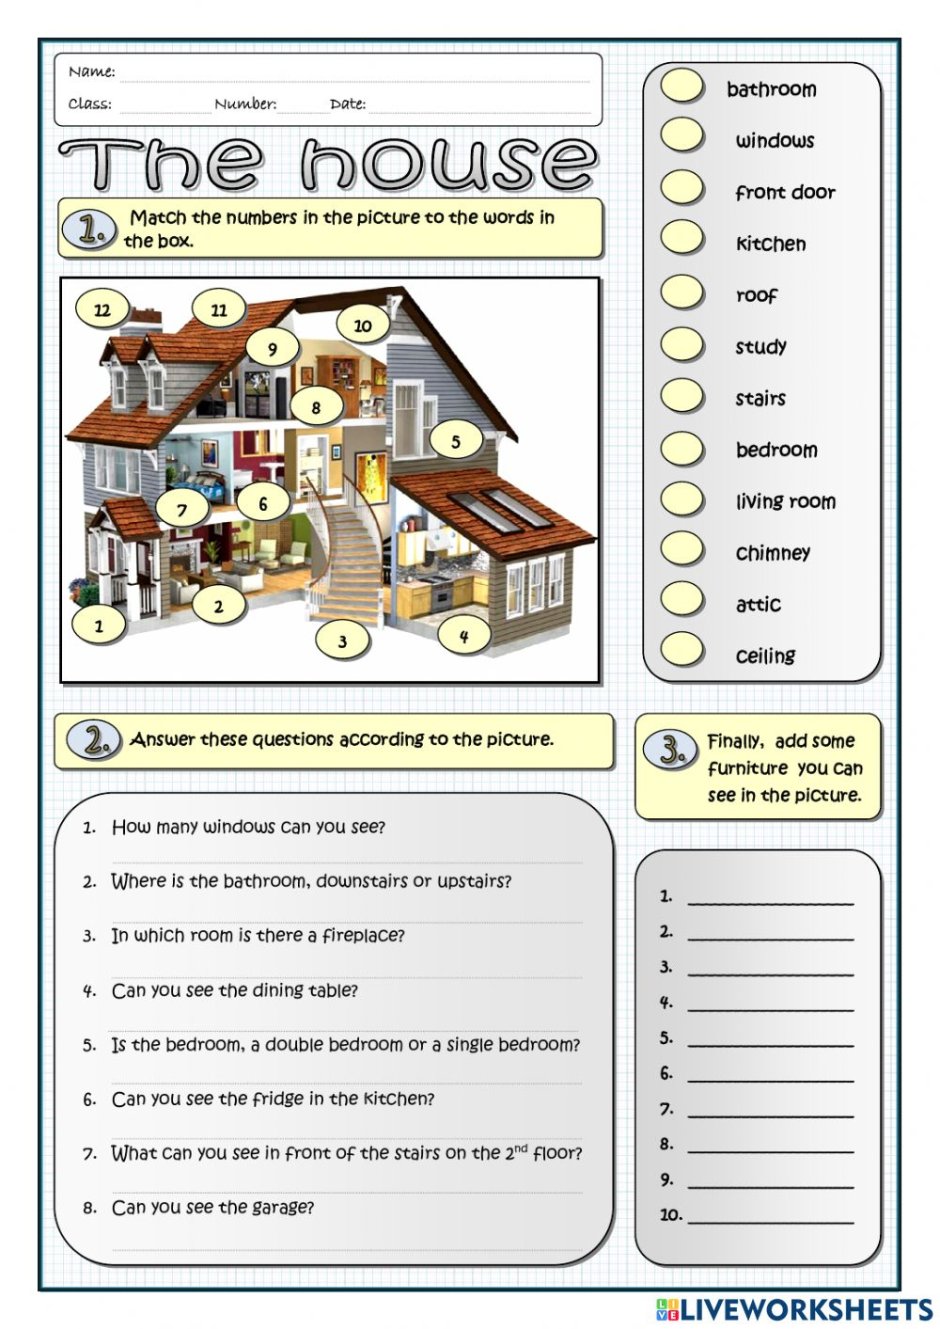 Tasks on Parts of the House